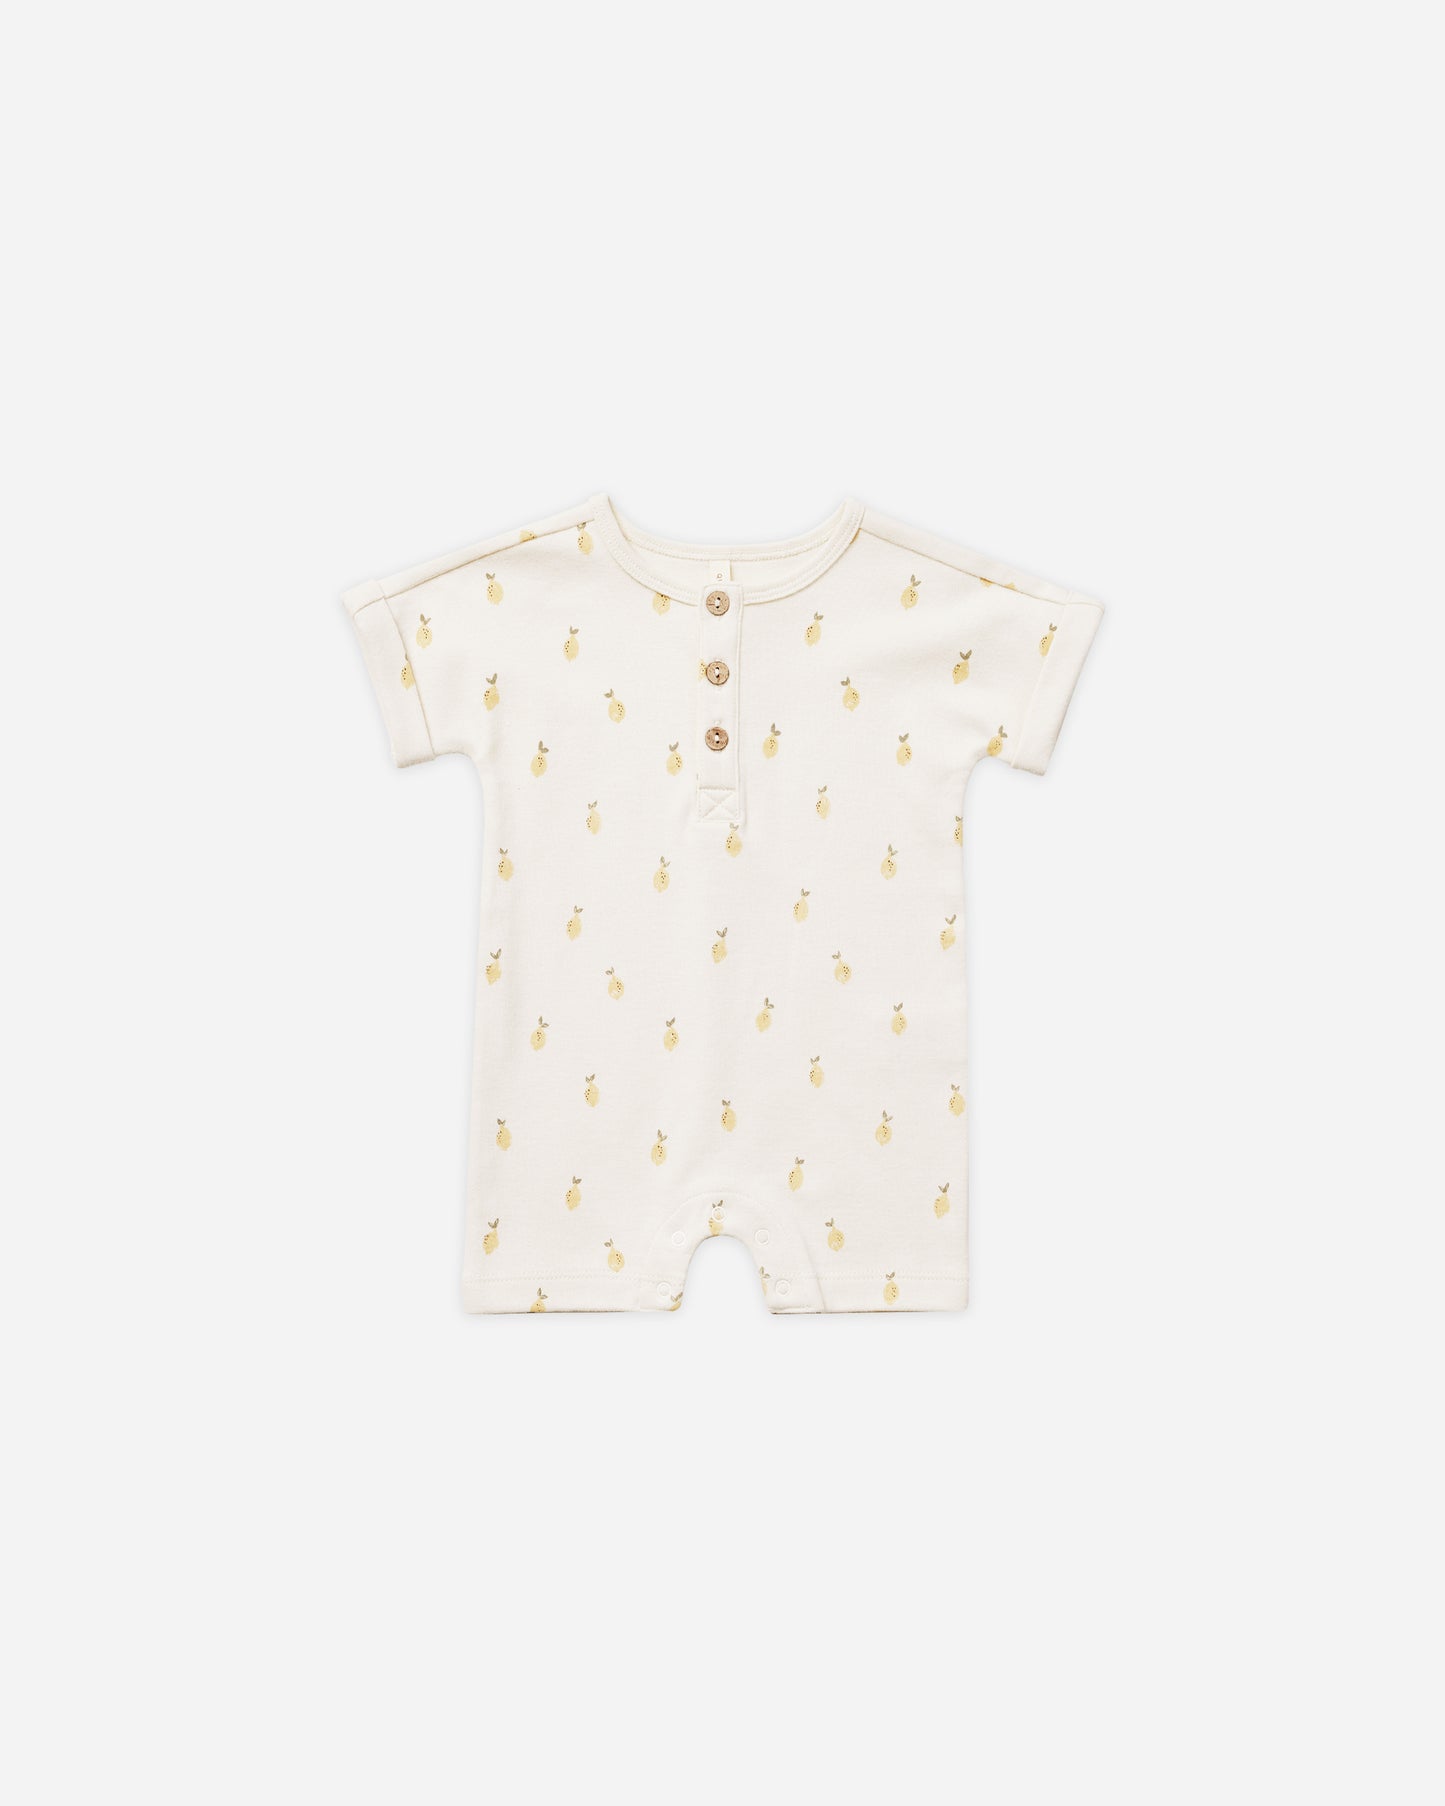 Short Sleeve One-Piece || Lemons - Rylee + Cru | Kids Clothes | Trendy Baby Clothes | Modern Infant Outfits |